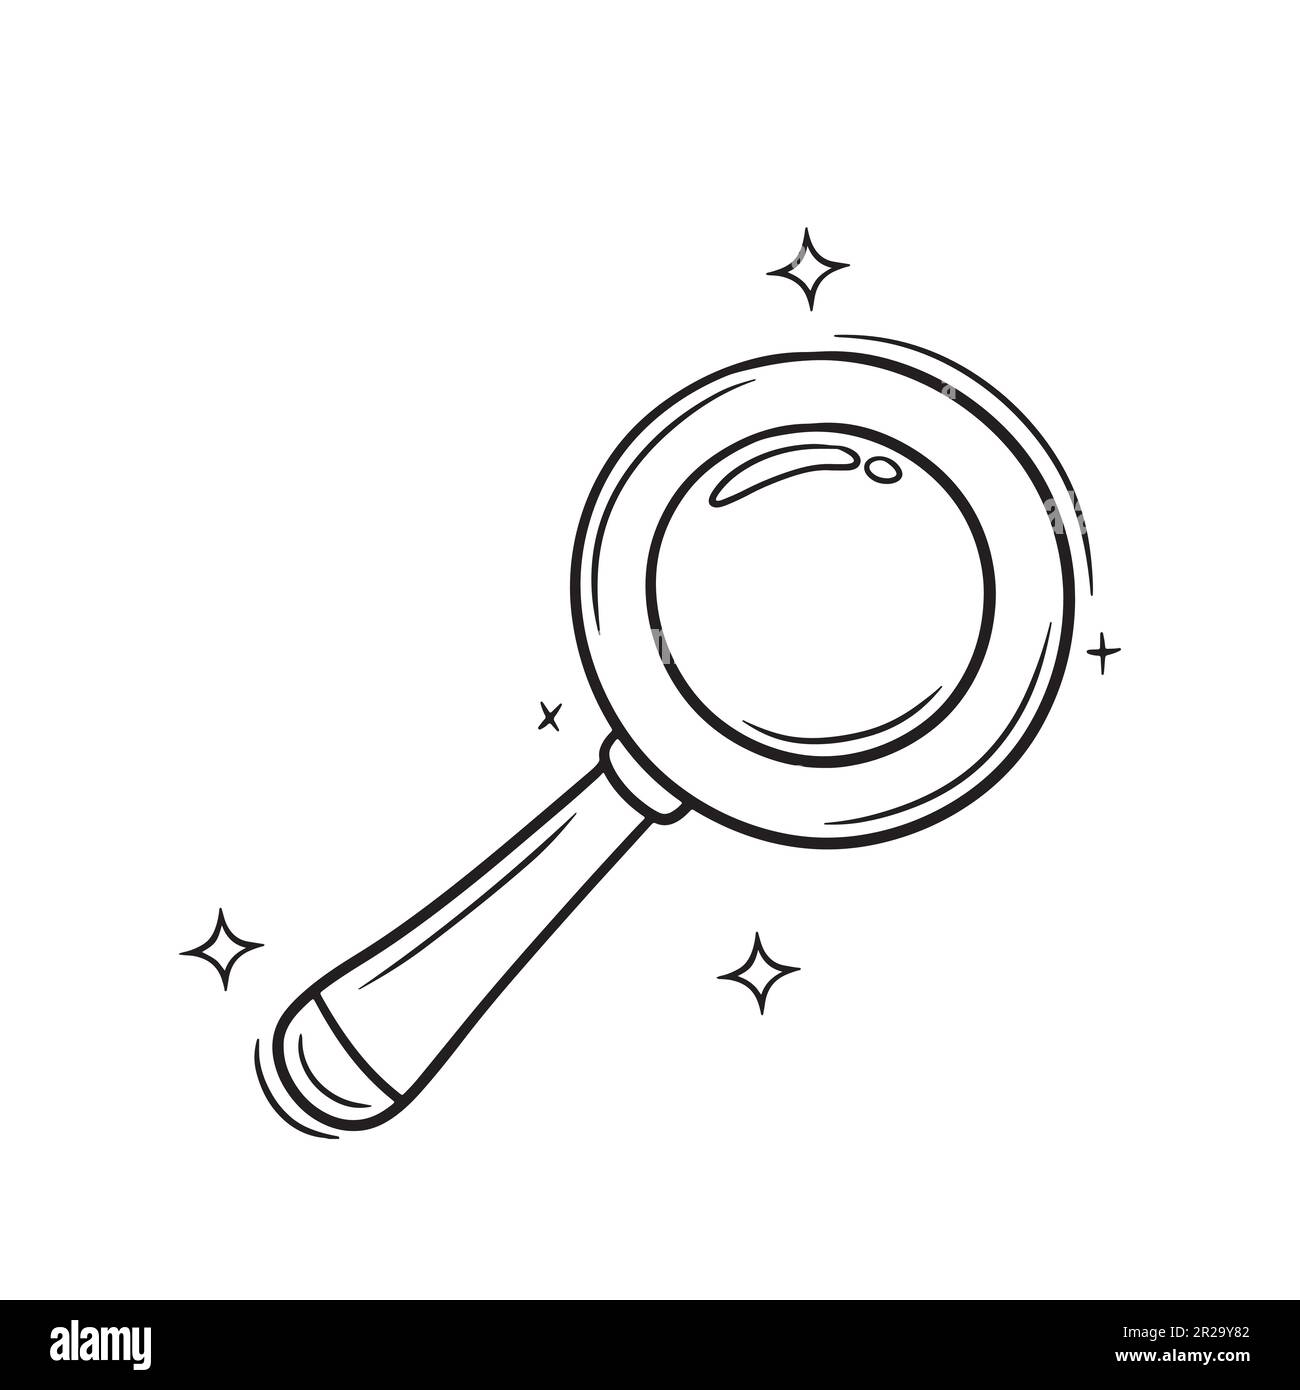 Hand Drawn Magnifying Glass.  Doodle Vector Sketch Illustration Stock Vector